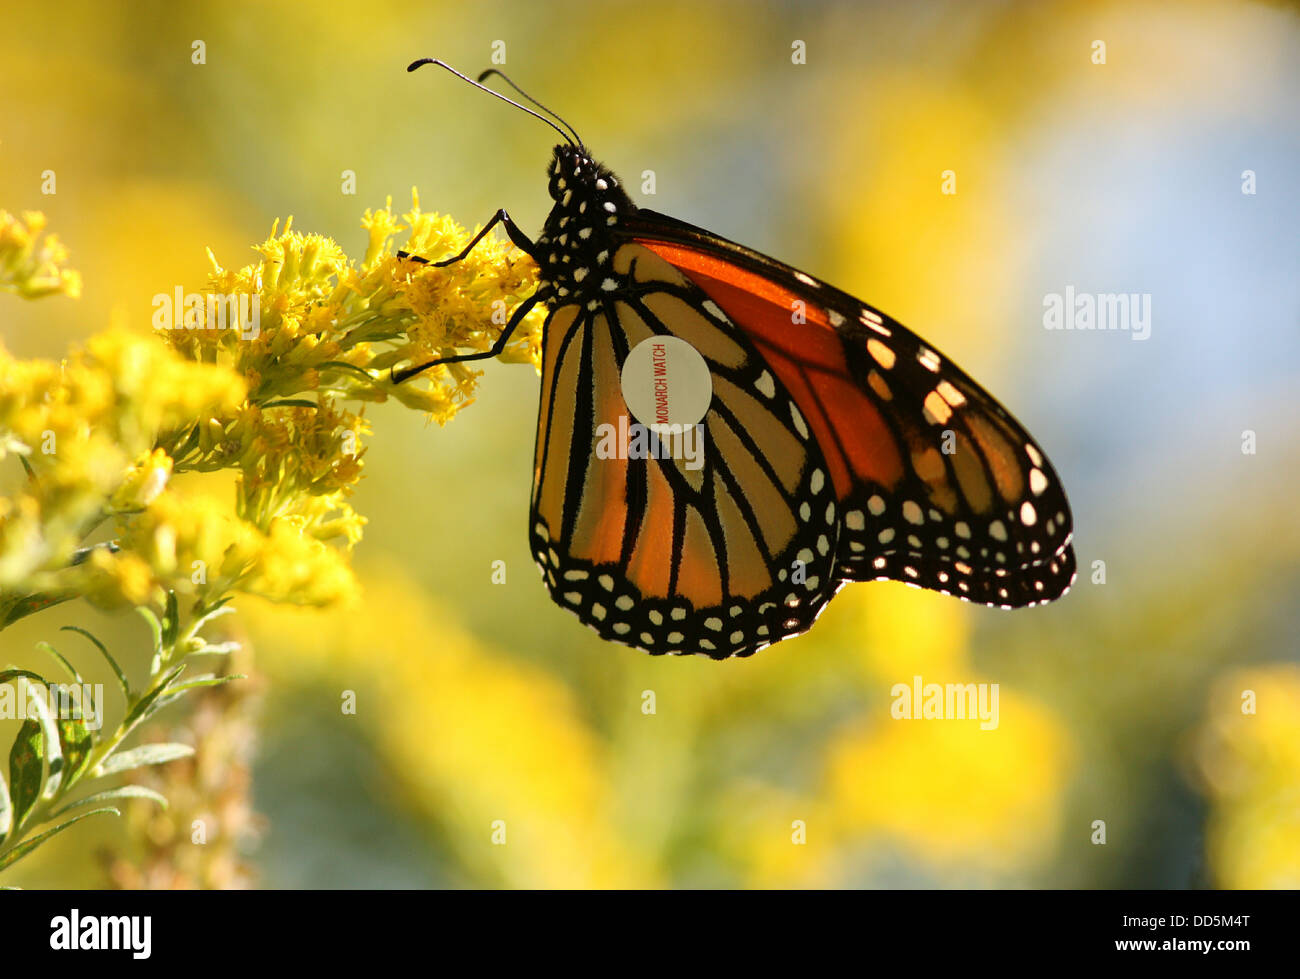 Closeup of Monarch Butterfly, Danaus plexippus, with tag to track migration between Canada and Mexico. Stock Photo